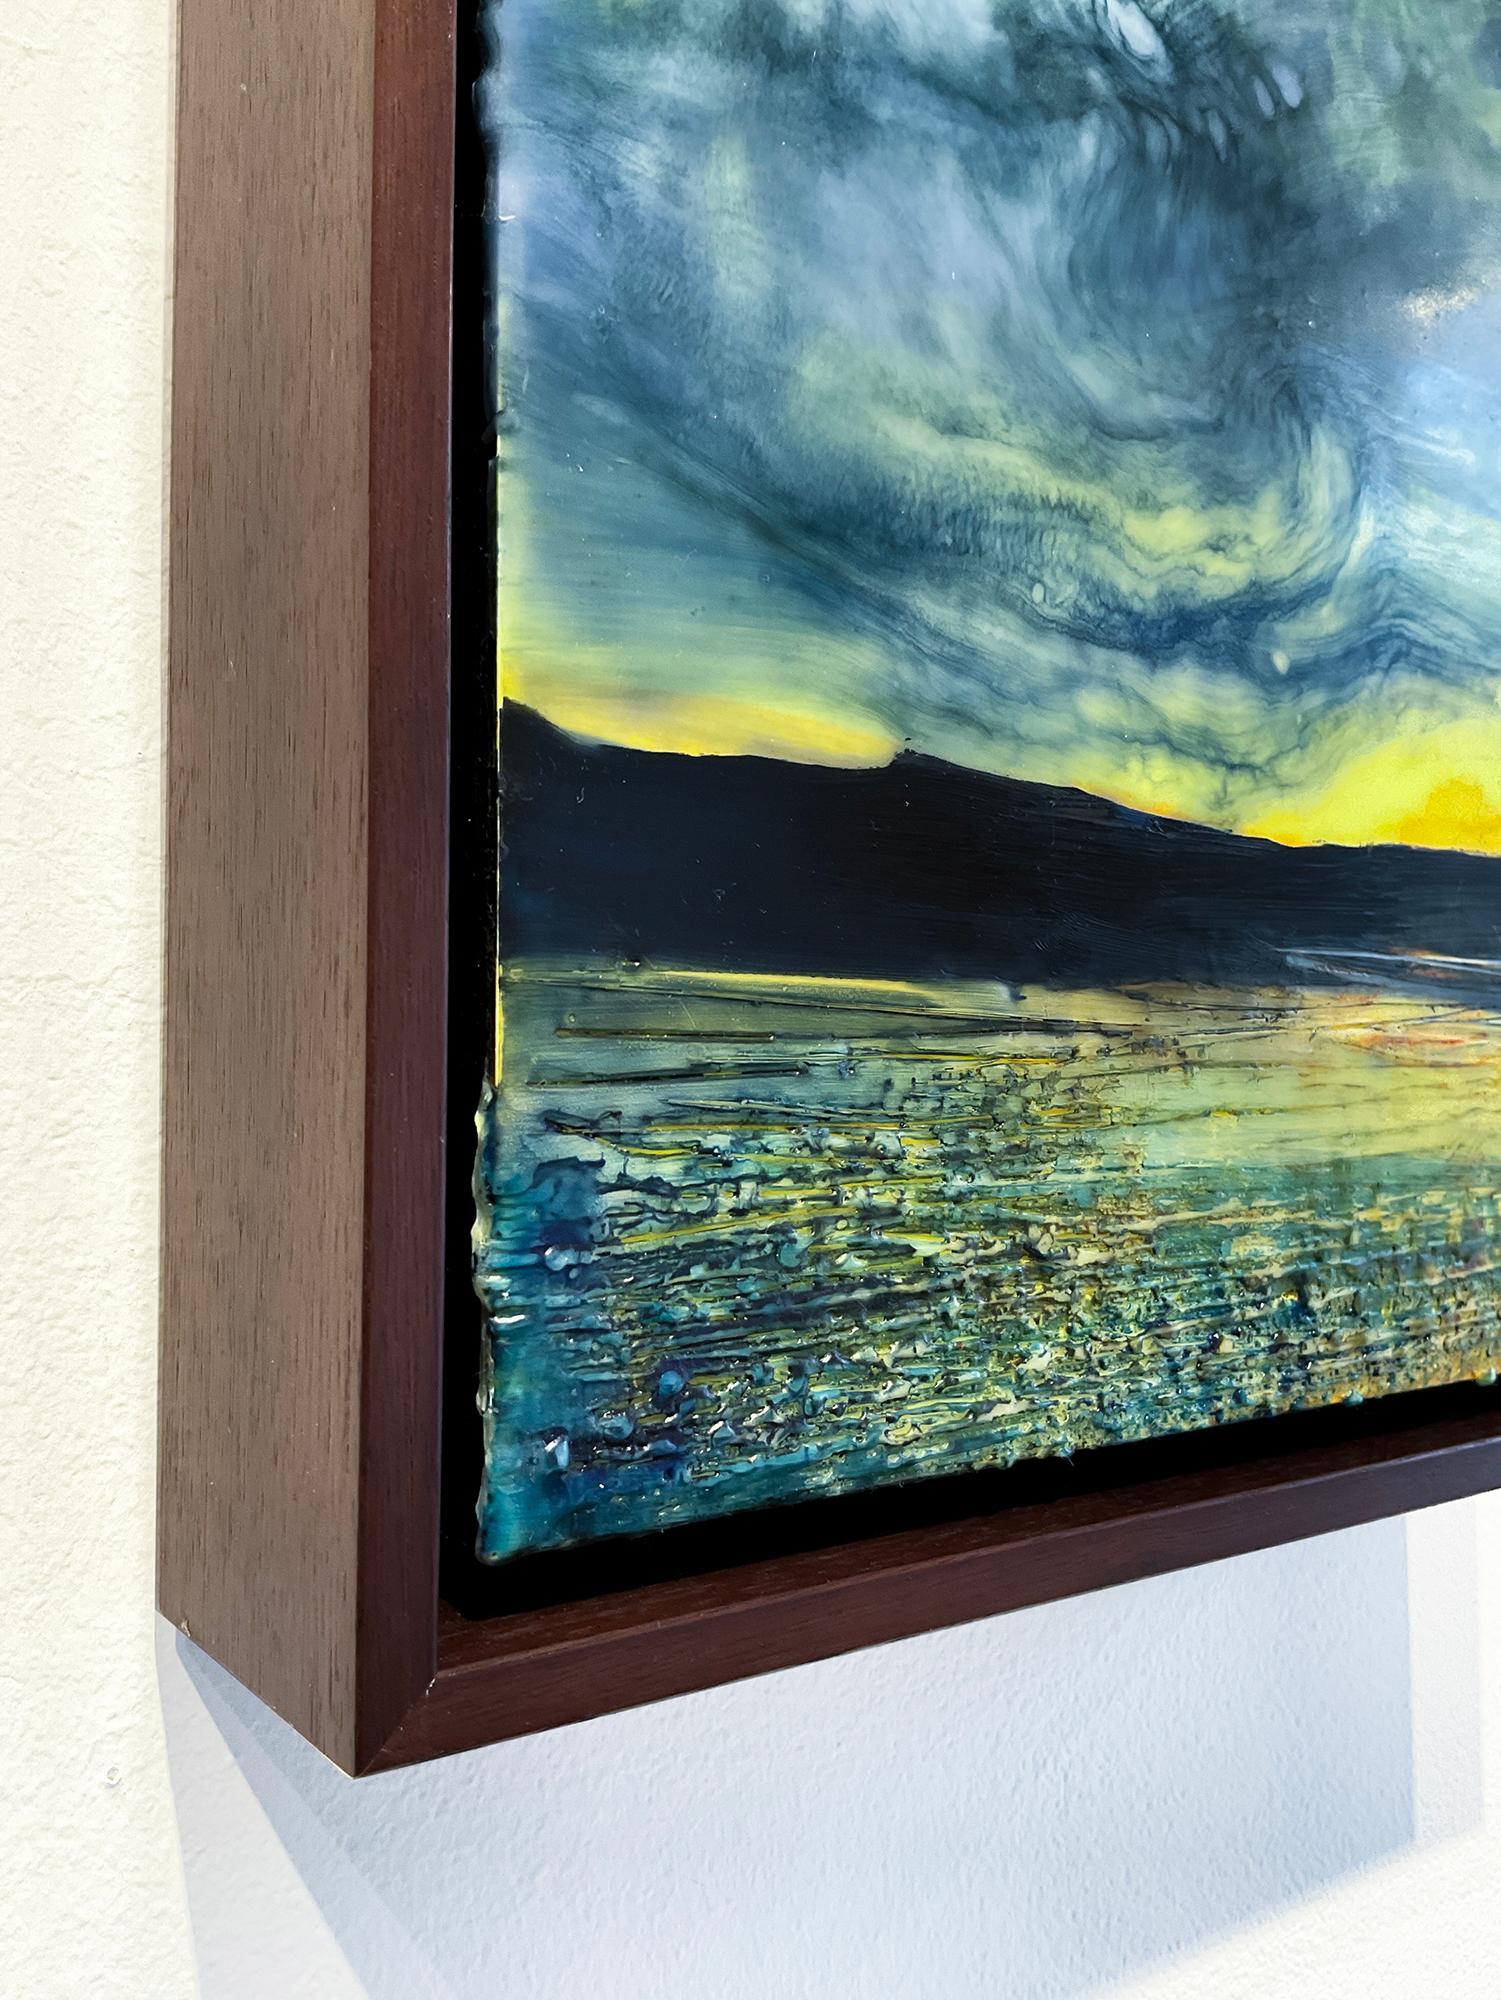 Light Slips Away (Encaustic Landscape Painting of Sunset w/ Mountains & River)  2